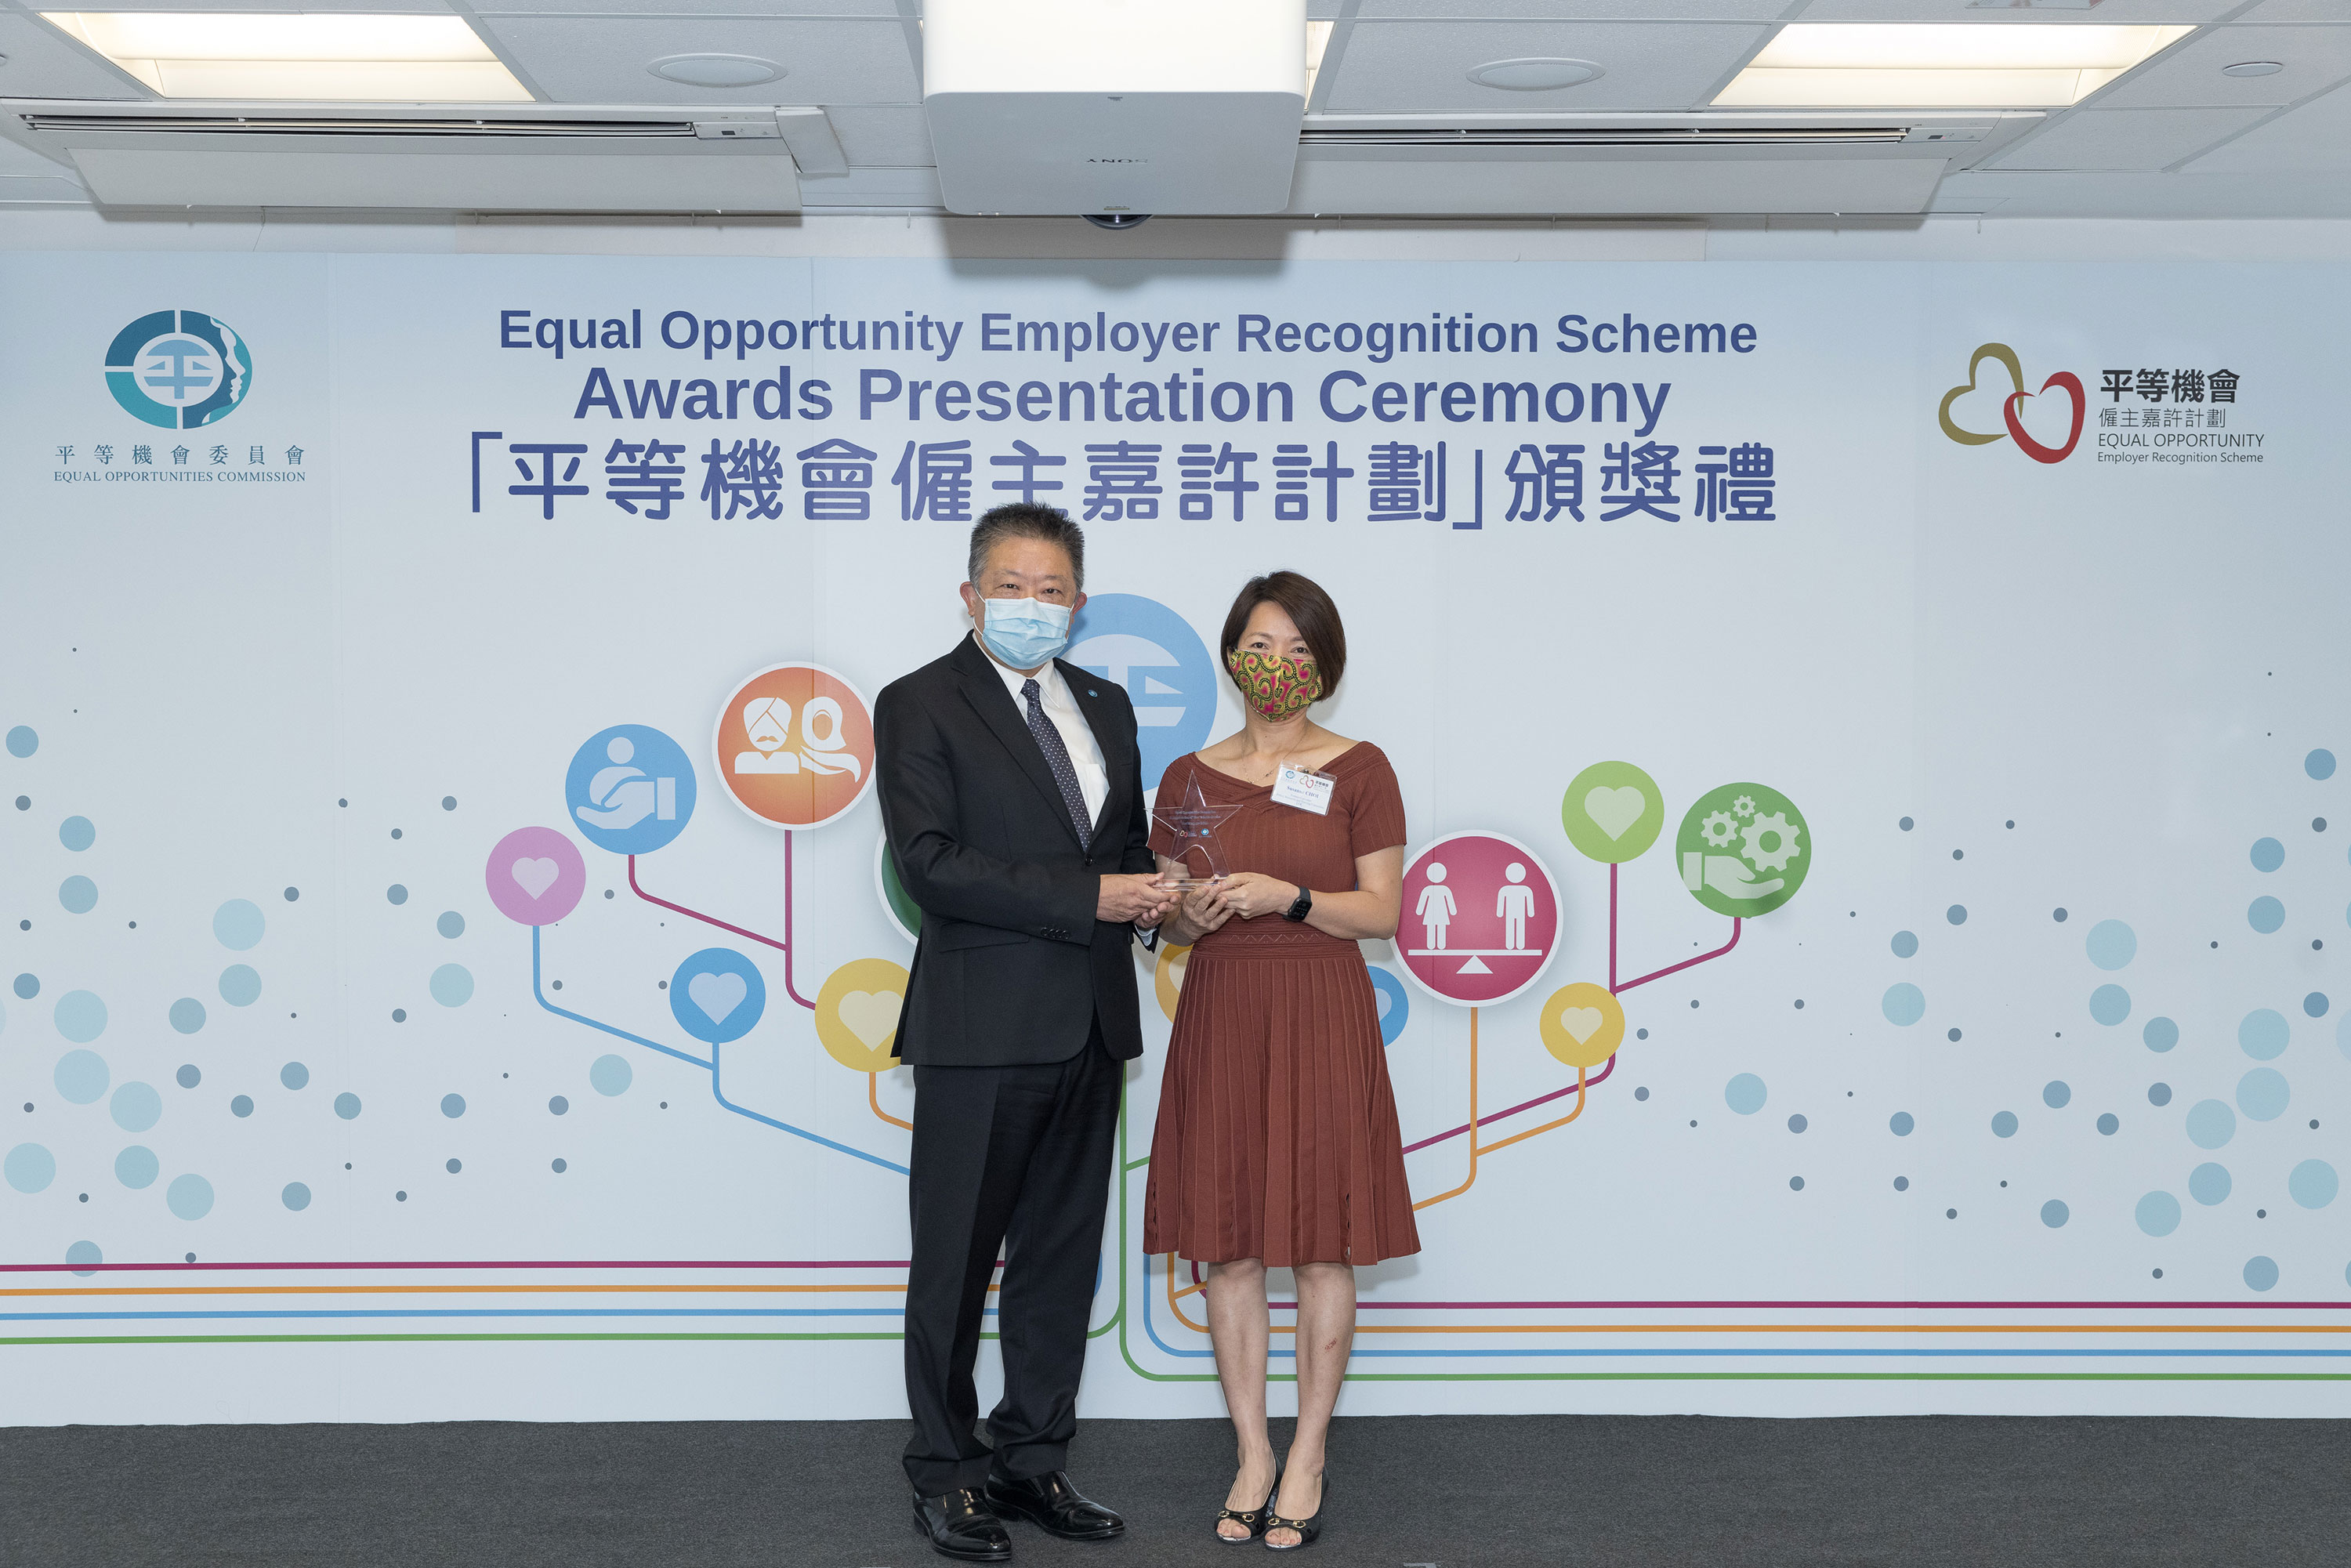 Mr Ricky CHU Man-kin, IDS, Chairperson of the Equal Opportunities Commission (left) presents souvenir to EOC Member Professor Susanne CHOI (right), who served as member of the assessment panel of the Equal Opportunity Employer Recognition Scheme. 